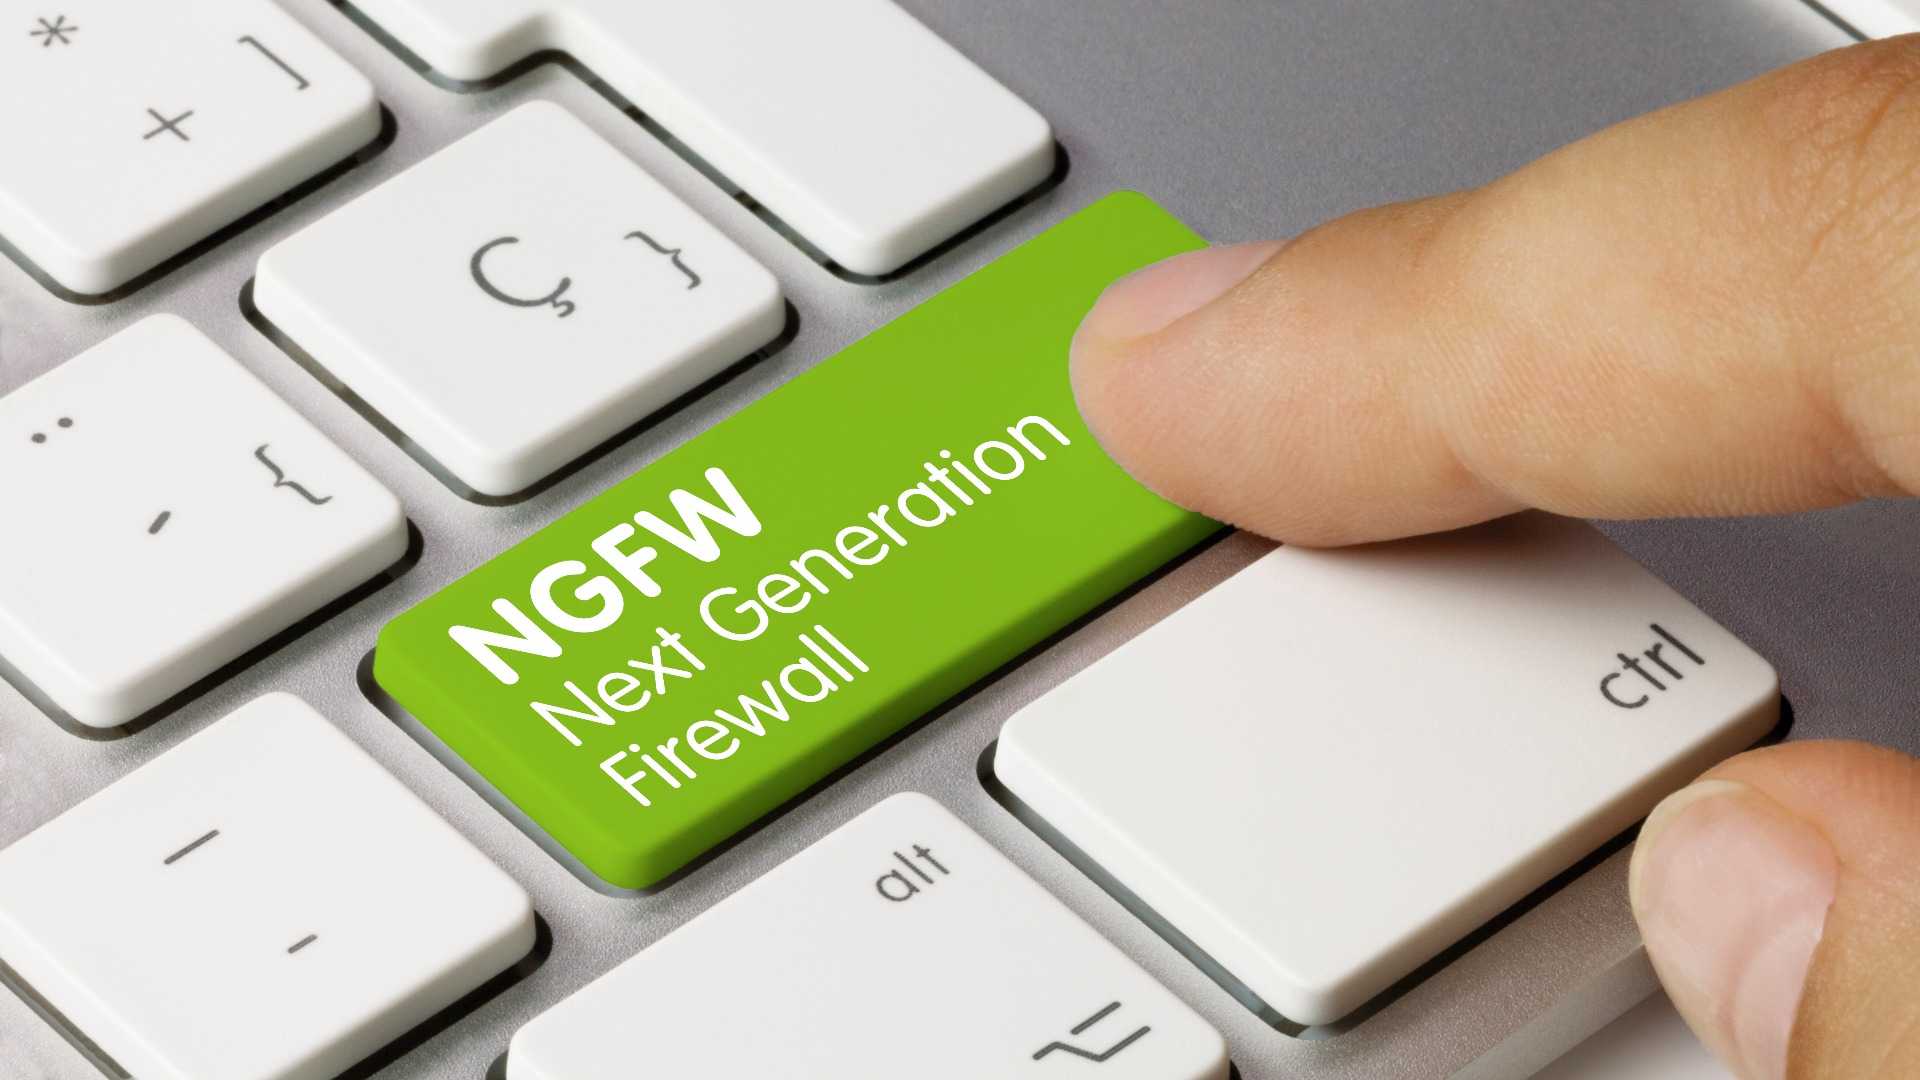 Next Generation Firewalls NGFW on a green keyboard button